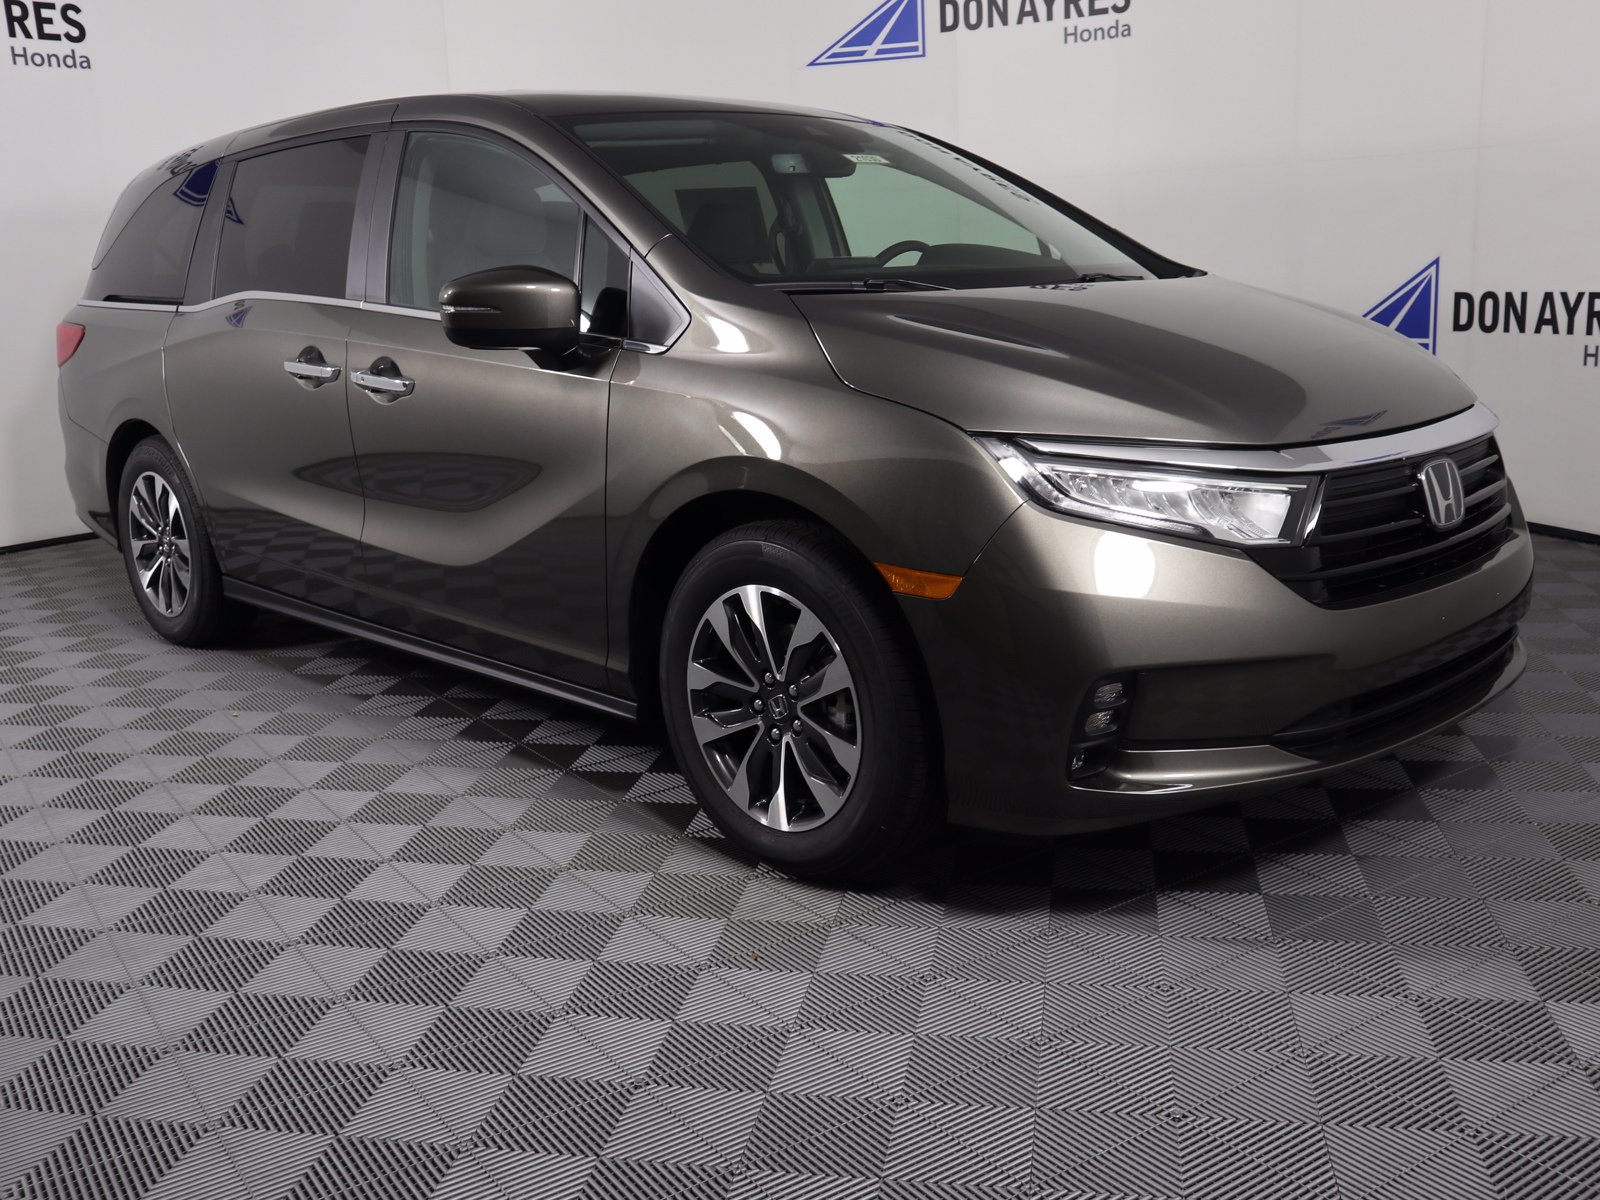 when will the 2021 honda odyssey be available